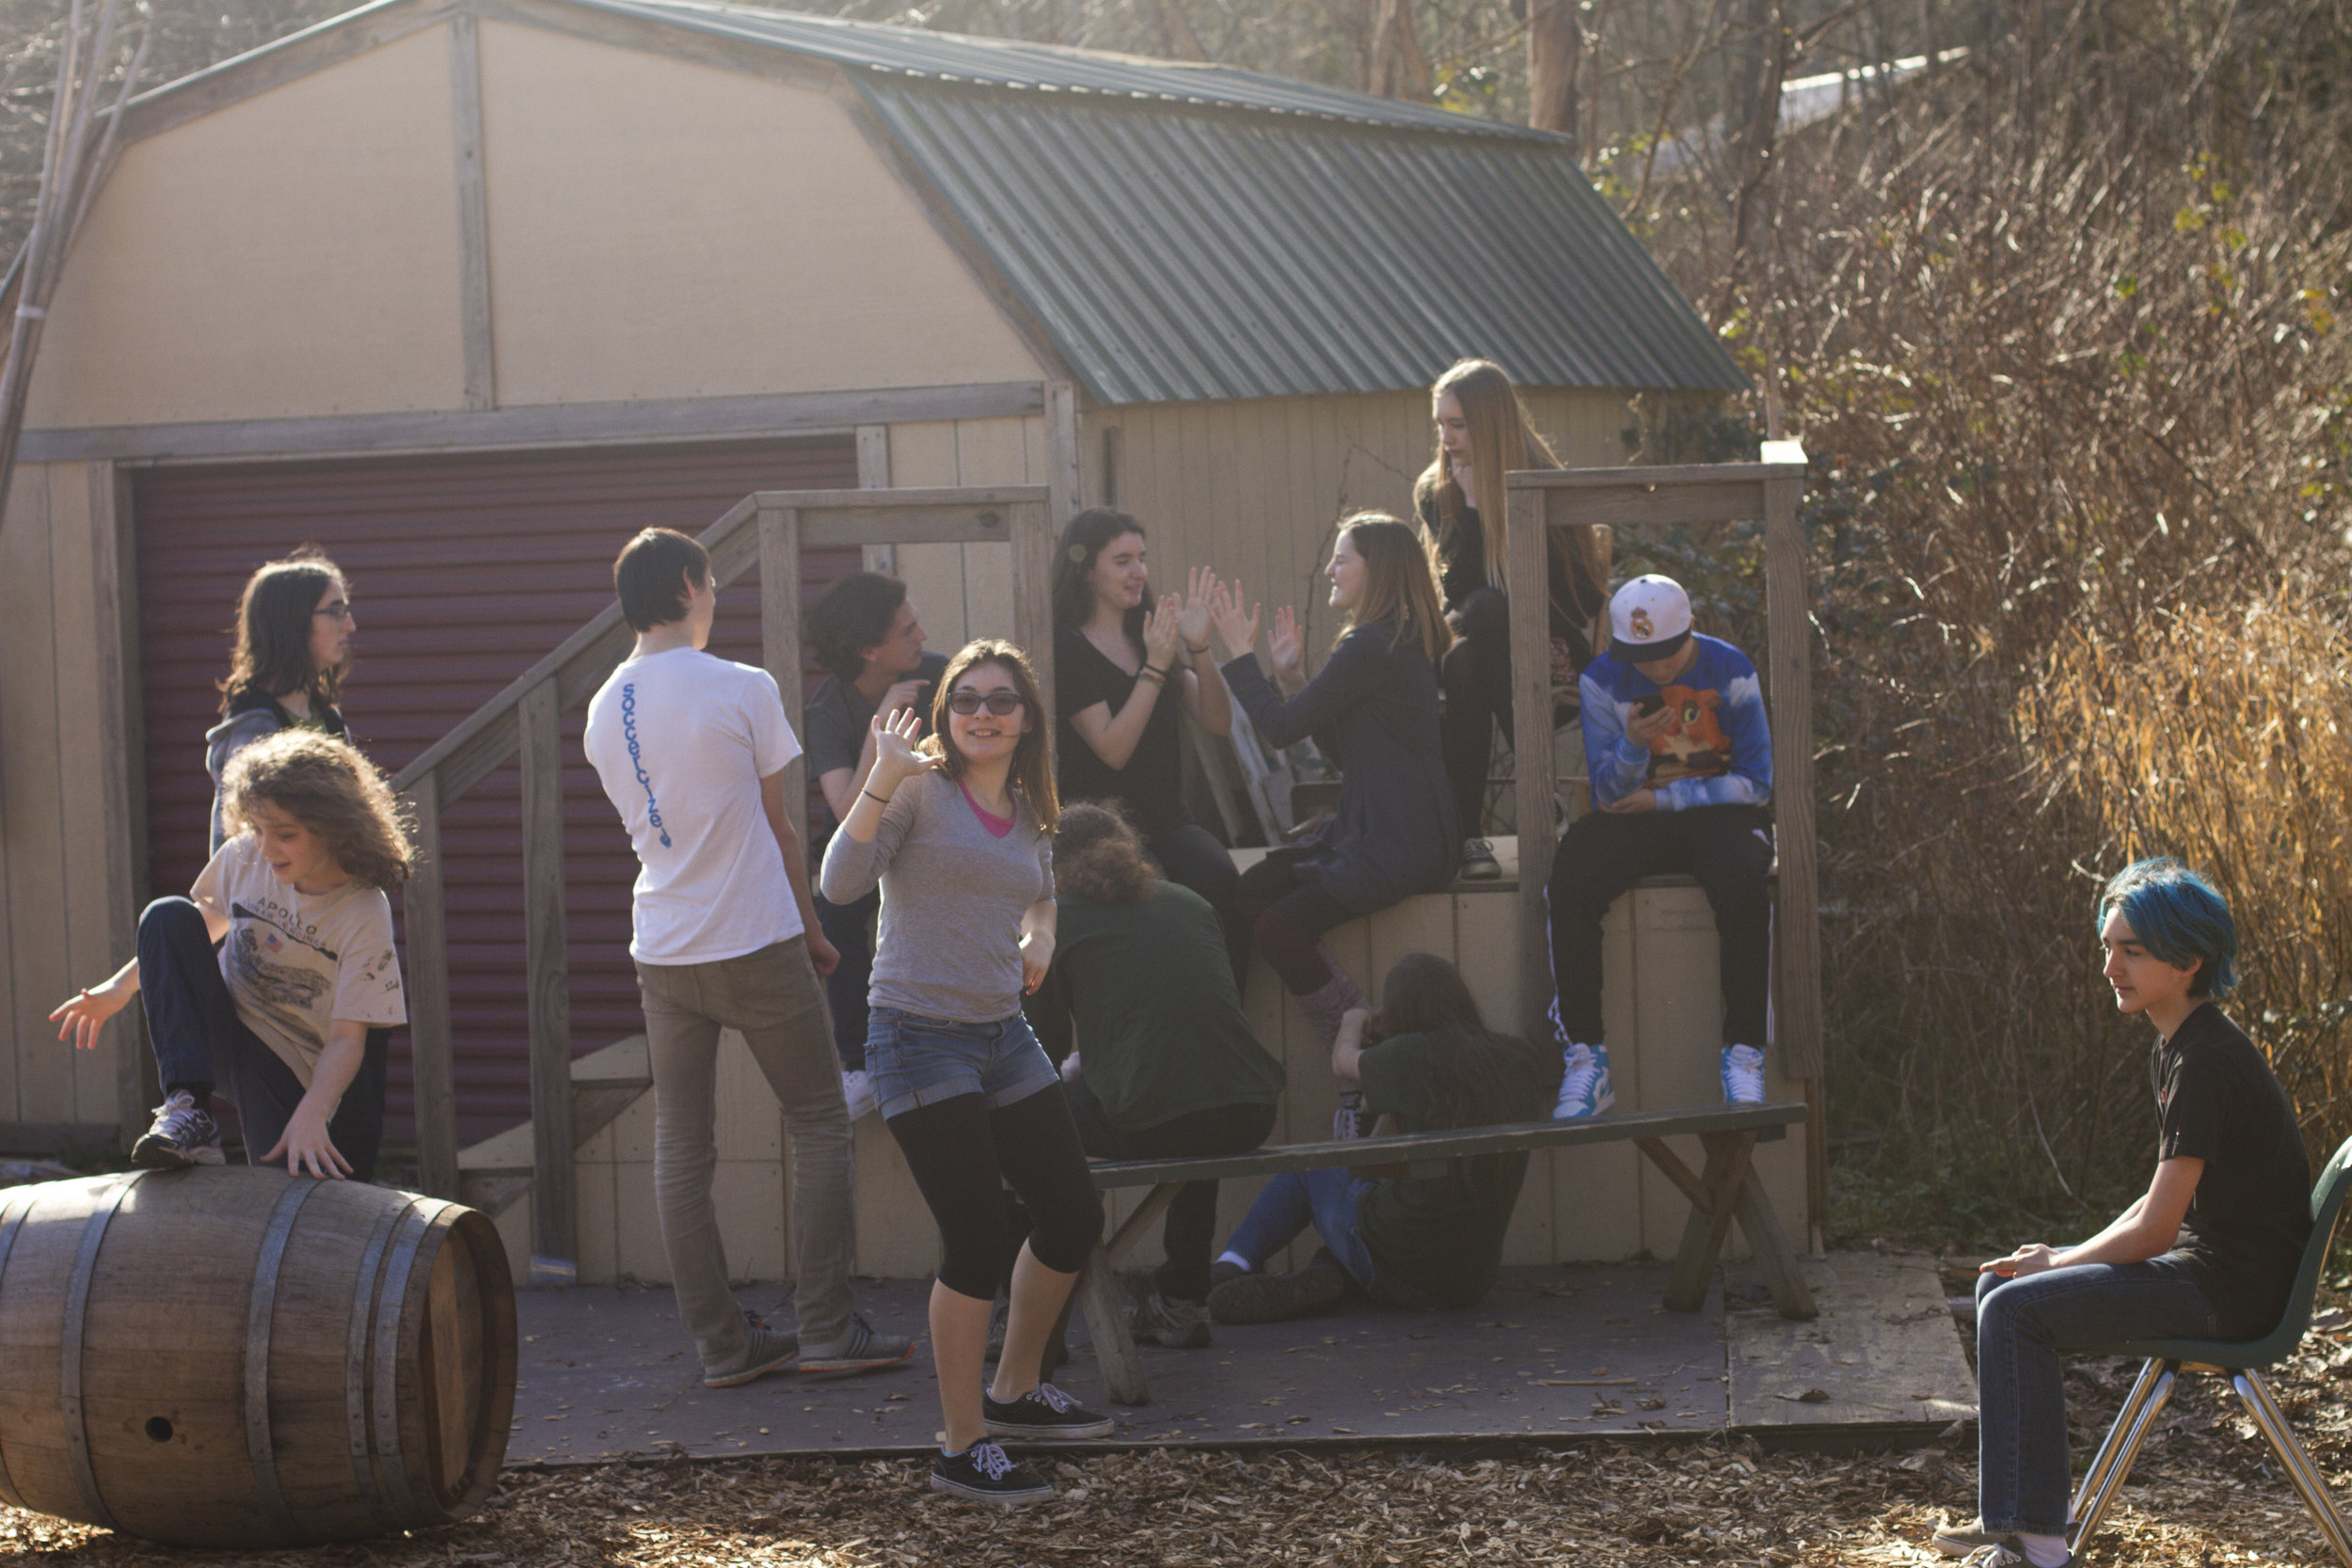 Large group of students on an outside structure, crowded around two students who are playing a hand-clapping game.